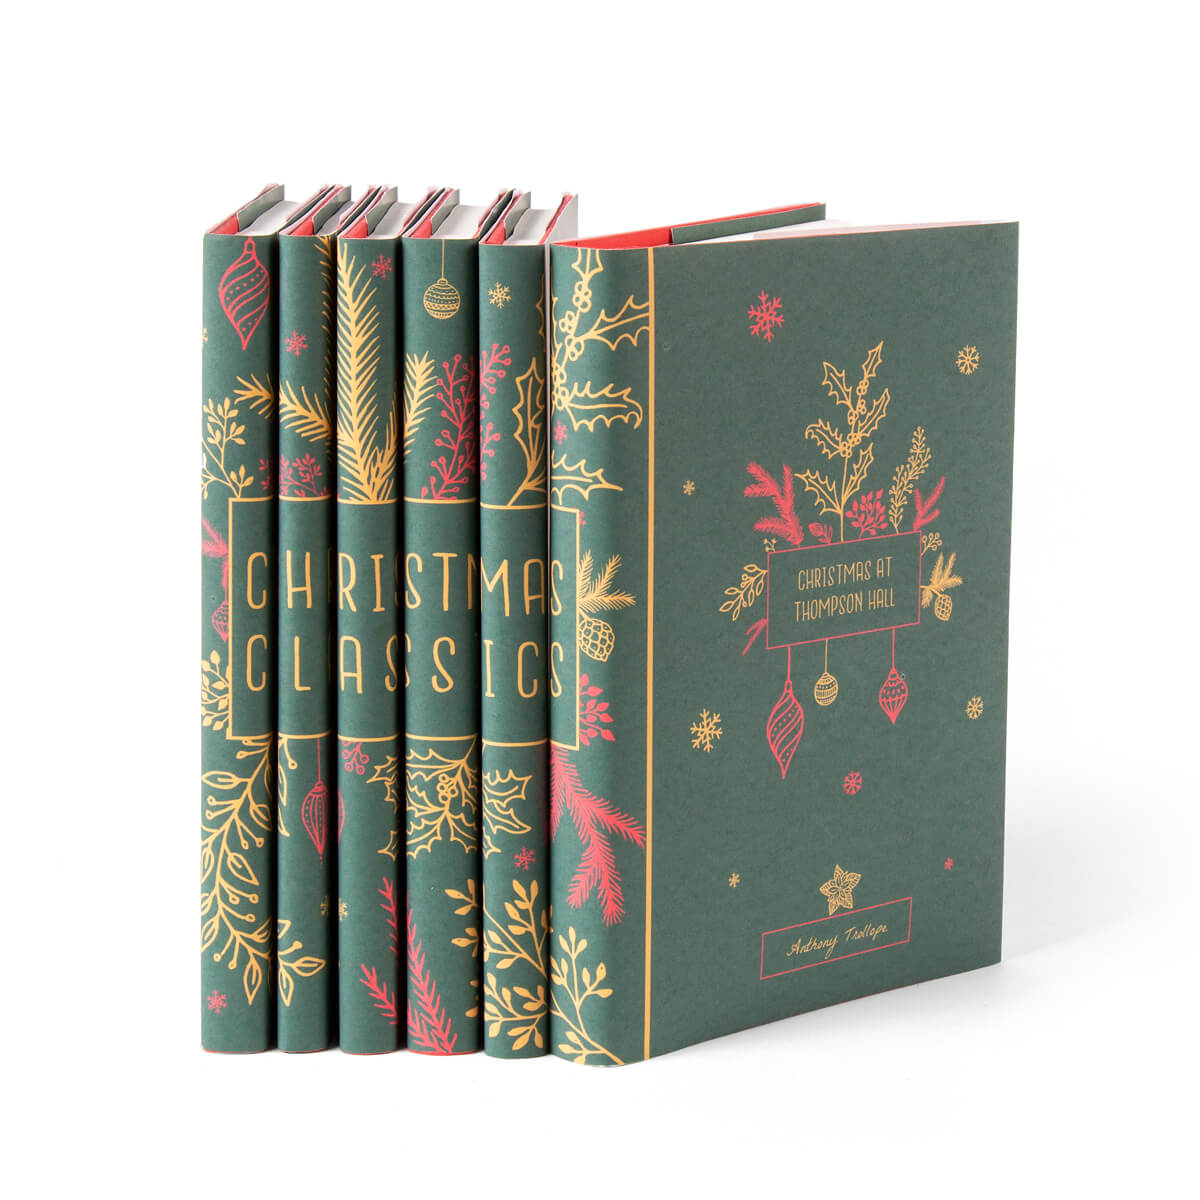 This festive set of novels is the perfect way to celebrate your favorite year-end traditions. Book Set, gift, trade, Christmas shopping. Hunter green covers with mistletoe and ornament illustrations